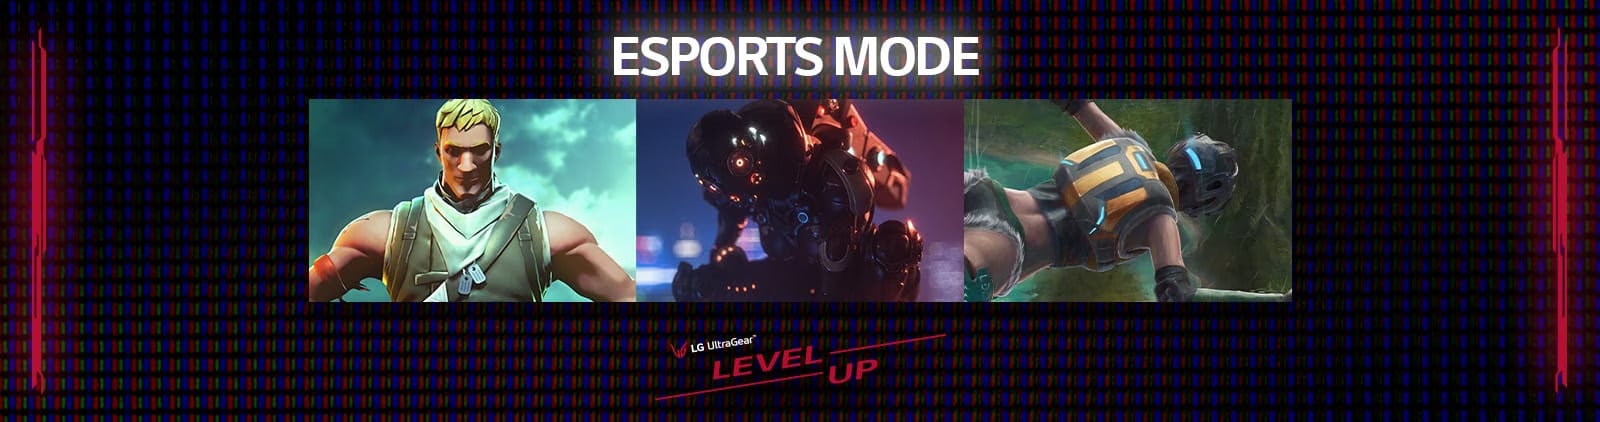 our-top-10-esports-game-picks-in-2021